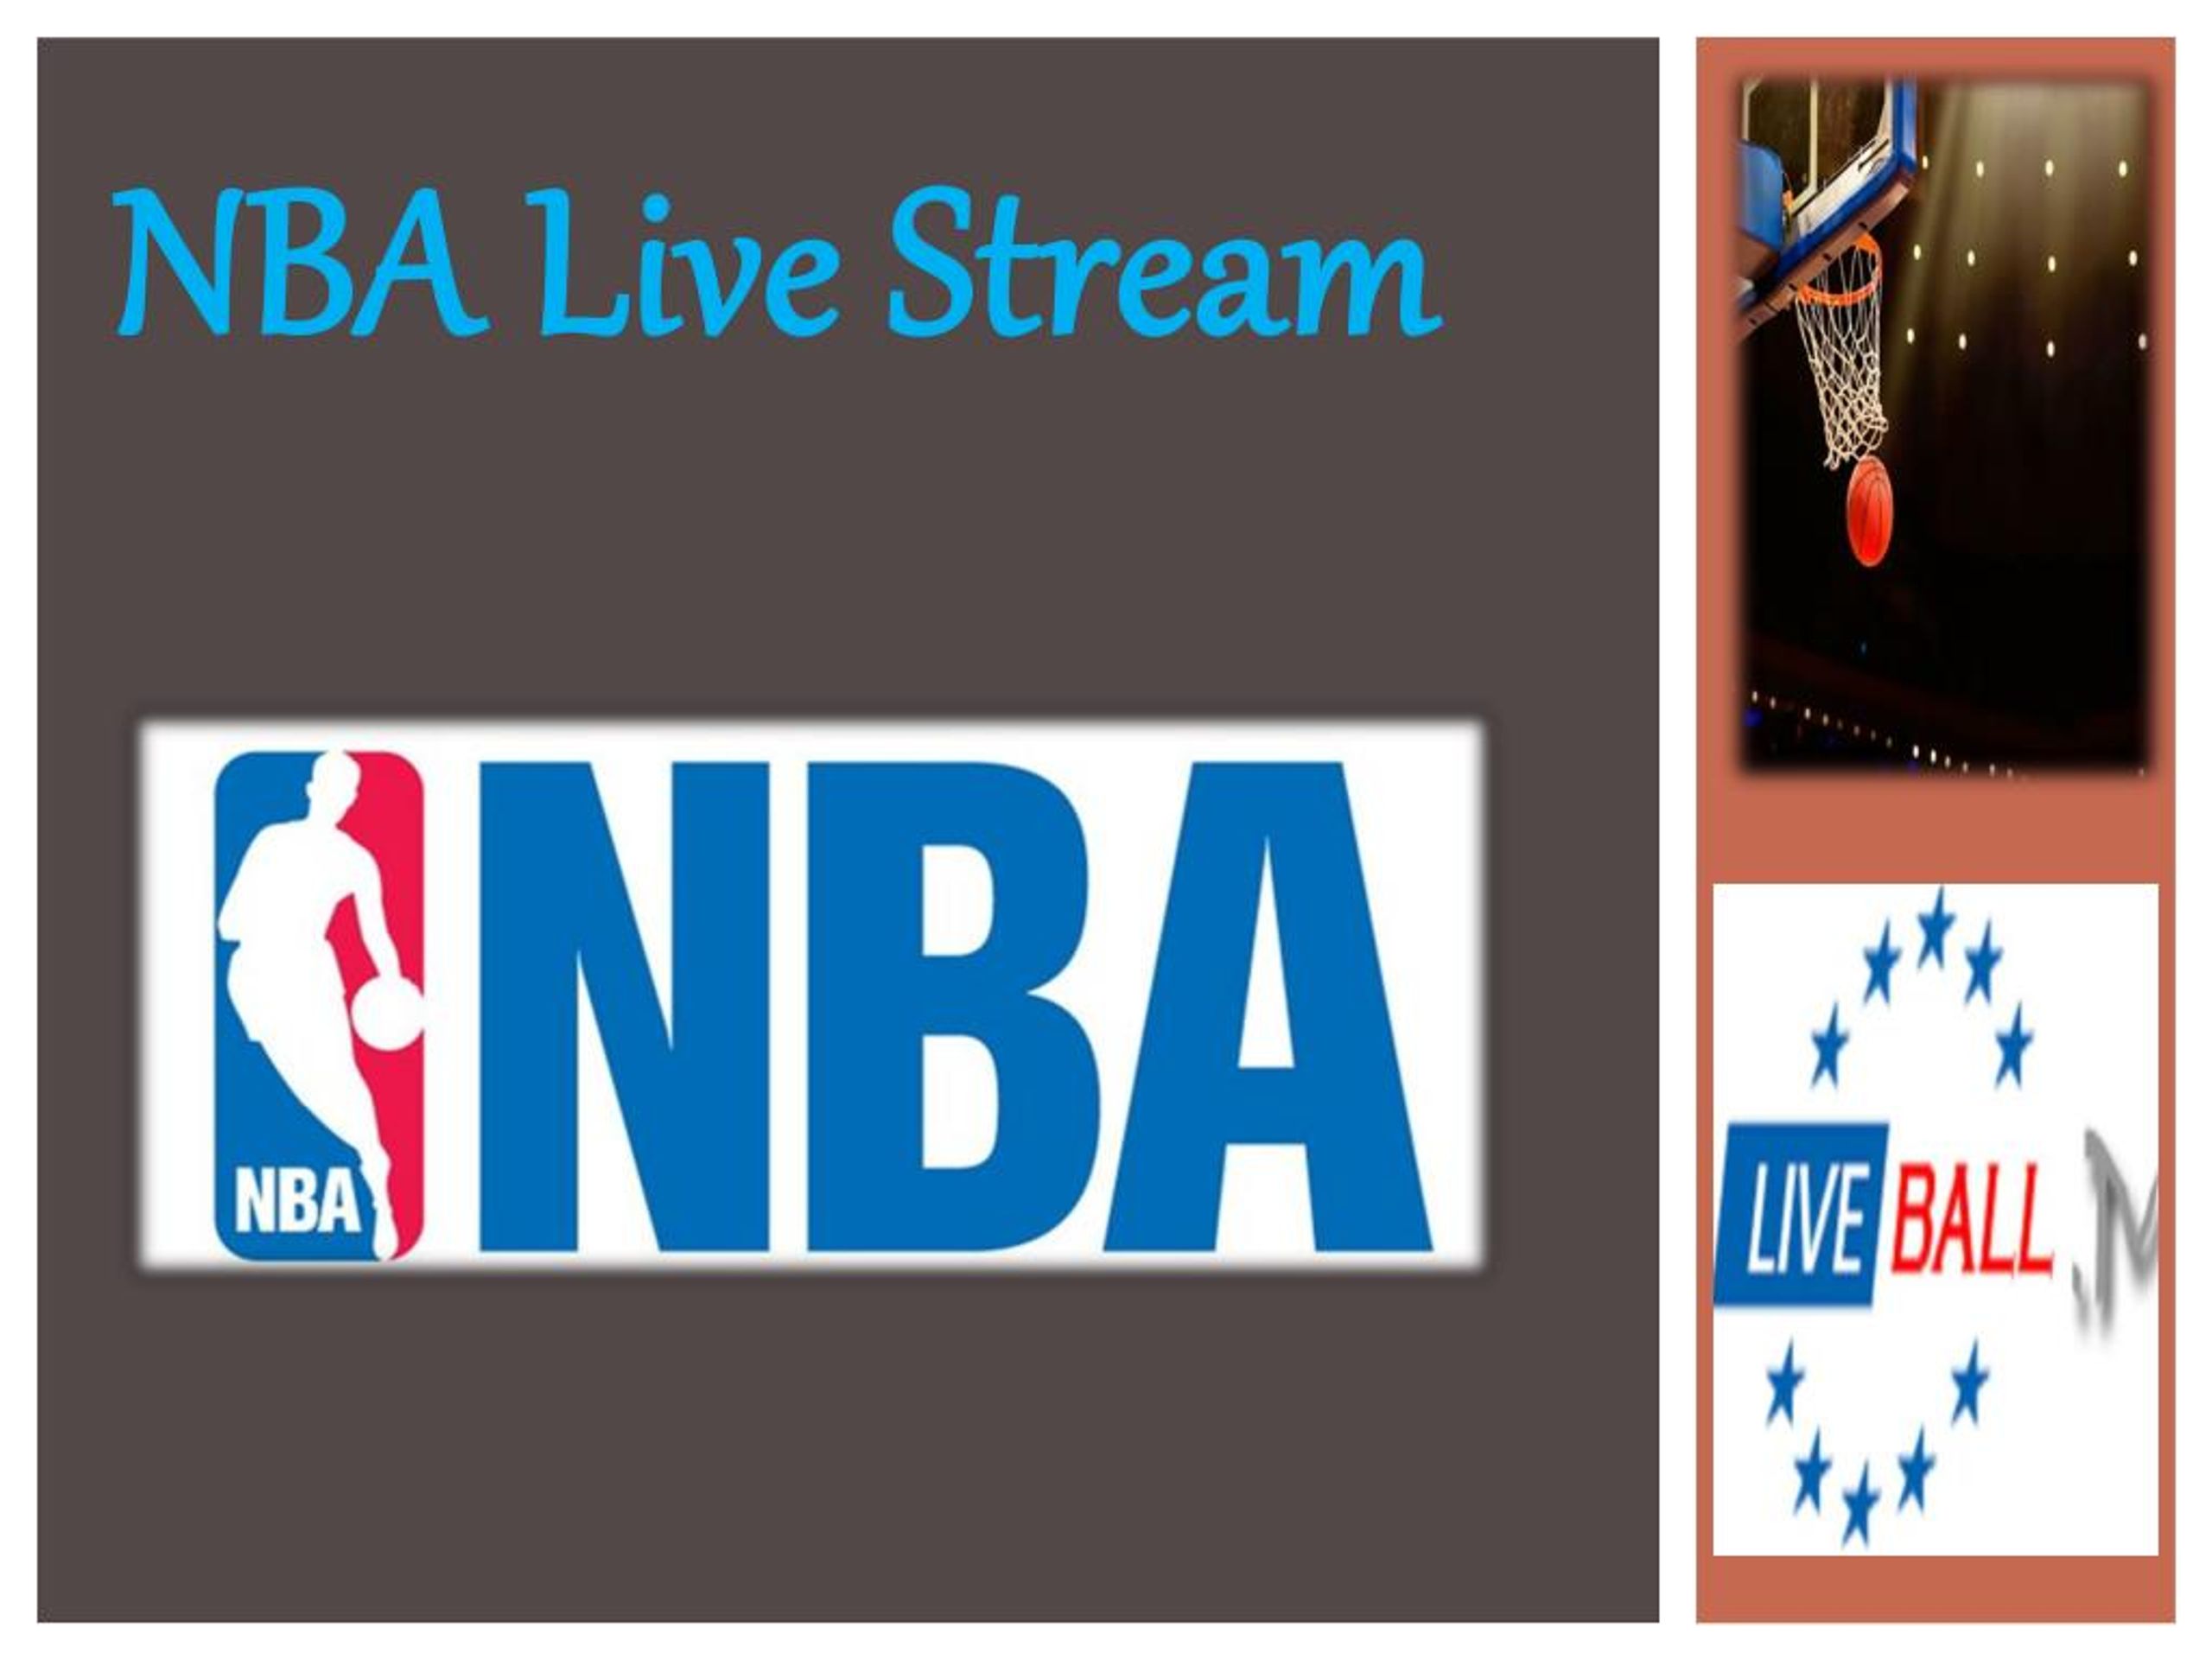 Ppt Nba Live Stream Powerpoint Presentation Free Download Id 7488540 - canelo play roblox for free